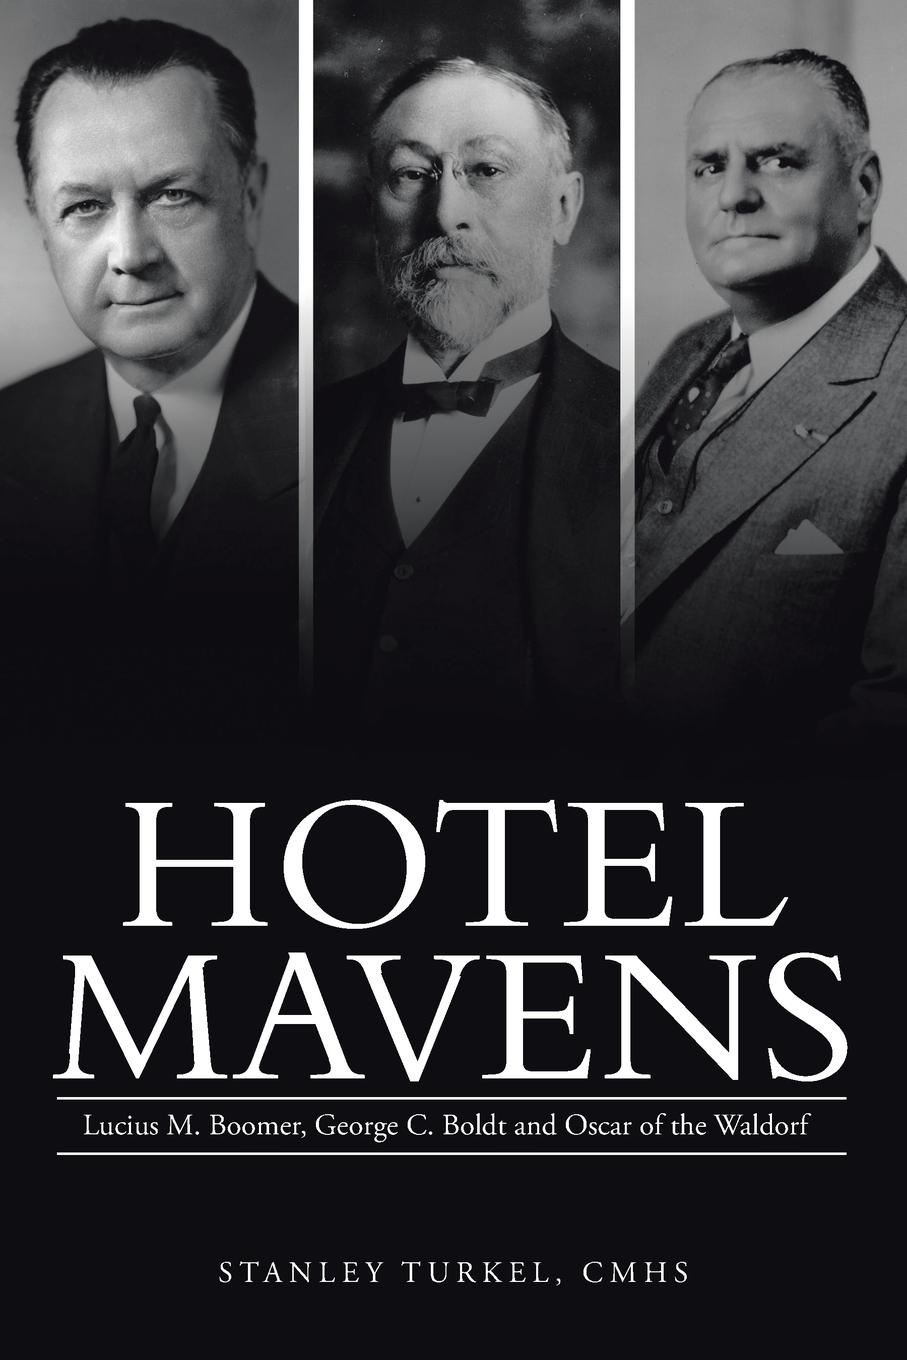 Hotel Mavens. Lucius M. Boomer, George C. Boldt and Oscar of the Waldorf